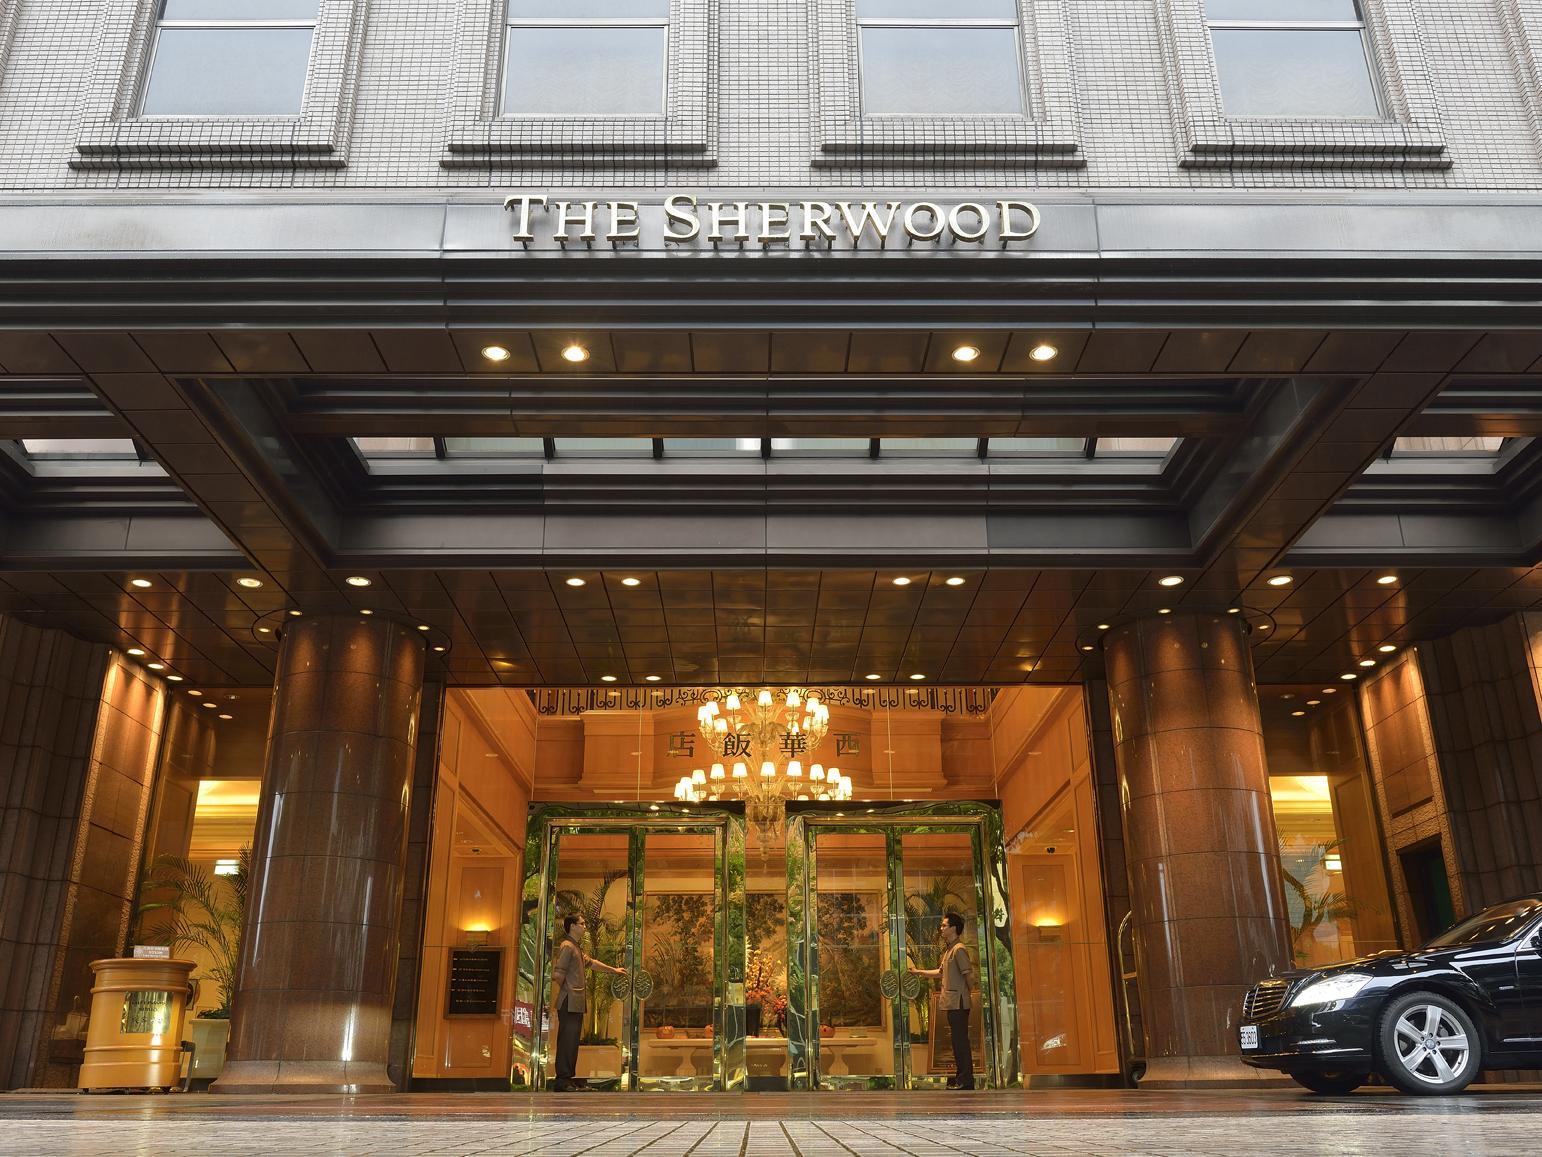 The Sherwood Taipei Taiwan FAQ 2016, What facilities are there in The Sherwood Taipei Taiwan 2016, What Languages Spoken are Supported in The Sherwood Taipei Taiwan 2016, Which payment cards are accepted in The Sherwood Taipei Taiwan , Taiwan The Sherwood Taipei room facilities and services Q&A 2016, Taiwan The Sherwood Taipei online booking services 2016, Taiwan The Sherwood Taipei address 2016, Taiwan The Sherwood Taipei telephone number 2016,Taiwan The Sherwood Taipei map 2016, Taiwan The Sherwood Taipei traffic guide 2016, how to go Taiwan The Sherwood Taipei, Taiwan The Sherwood Taipei booking online 2016, Taiwan The Sherwood Taipei room types 2016.